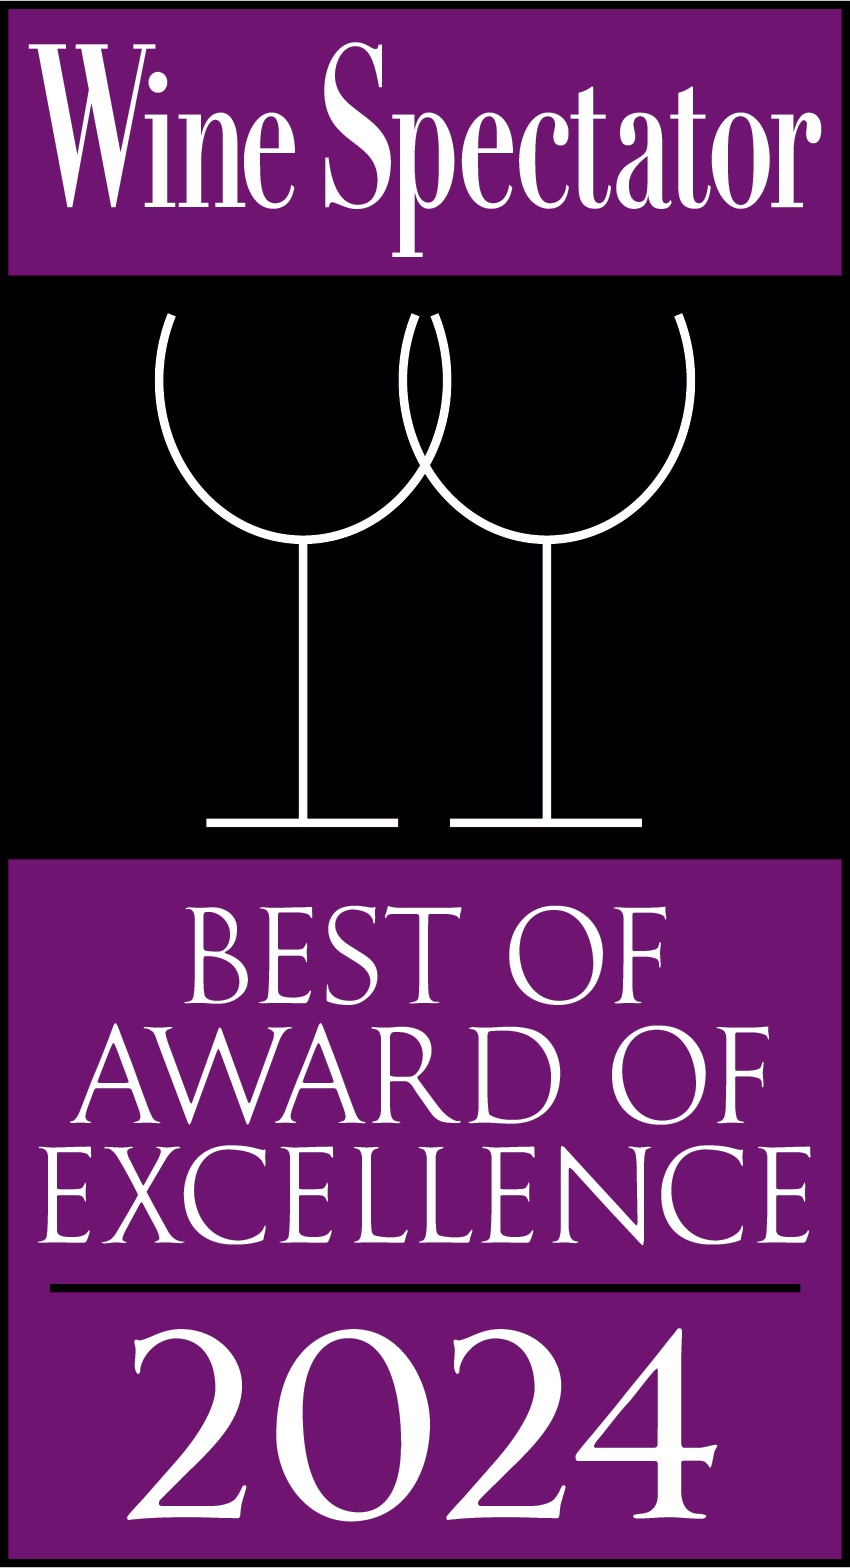 Wine Spectator 2024 - Award of Excellence